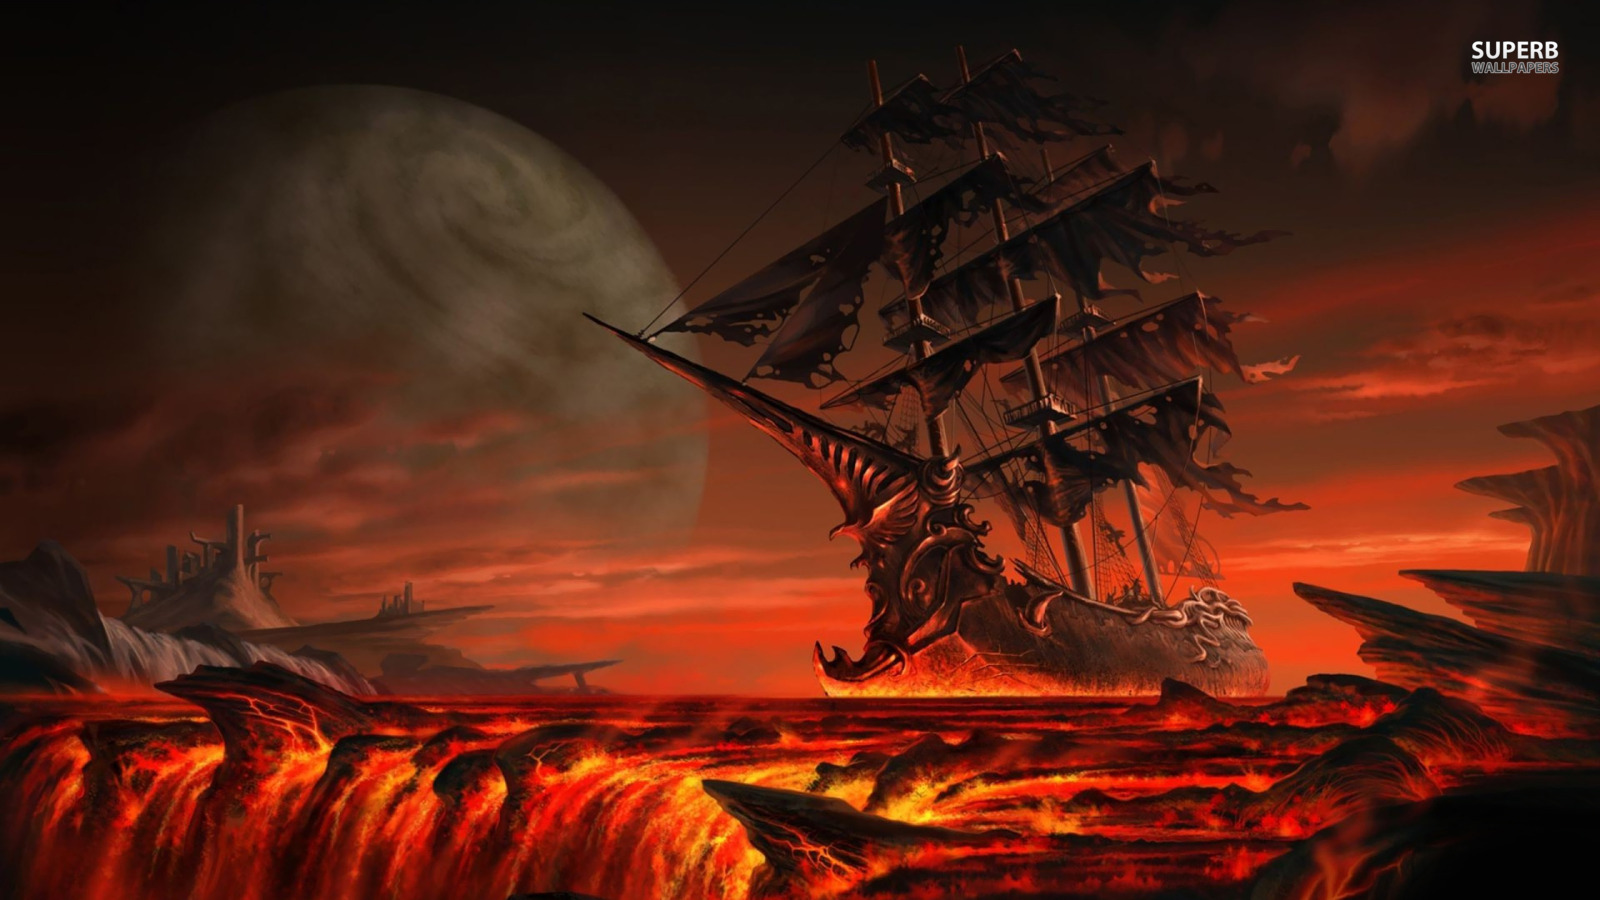 Pirates images Ghost Ship wallpaper photos 38709405